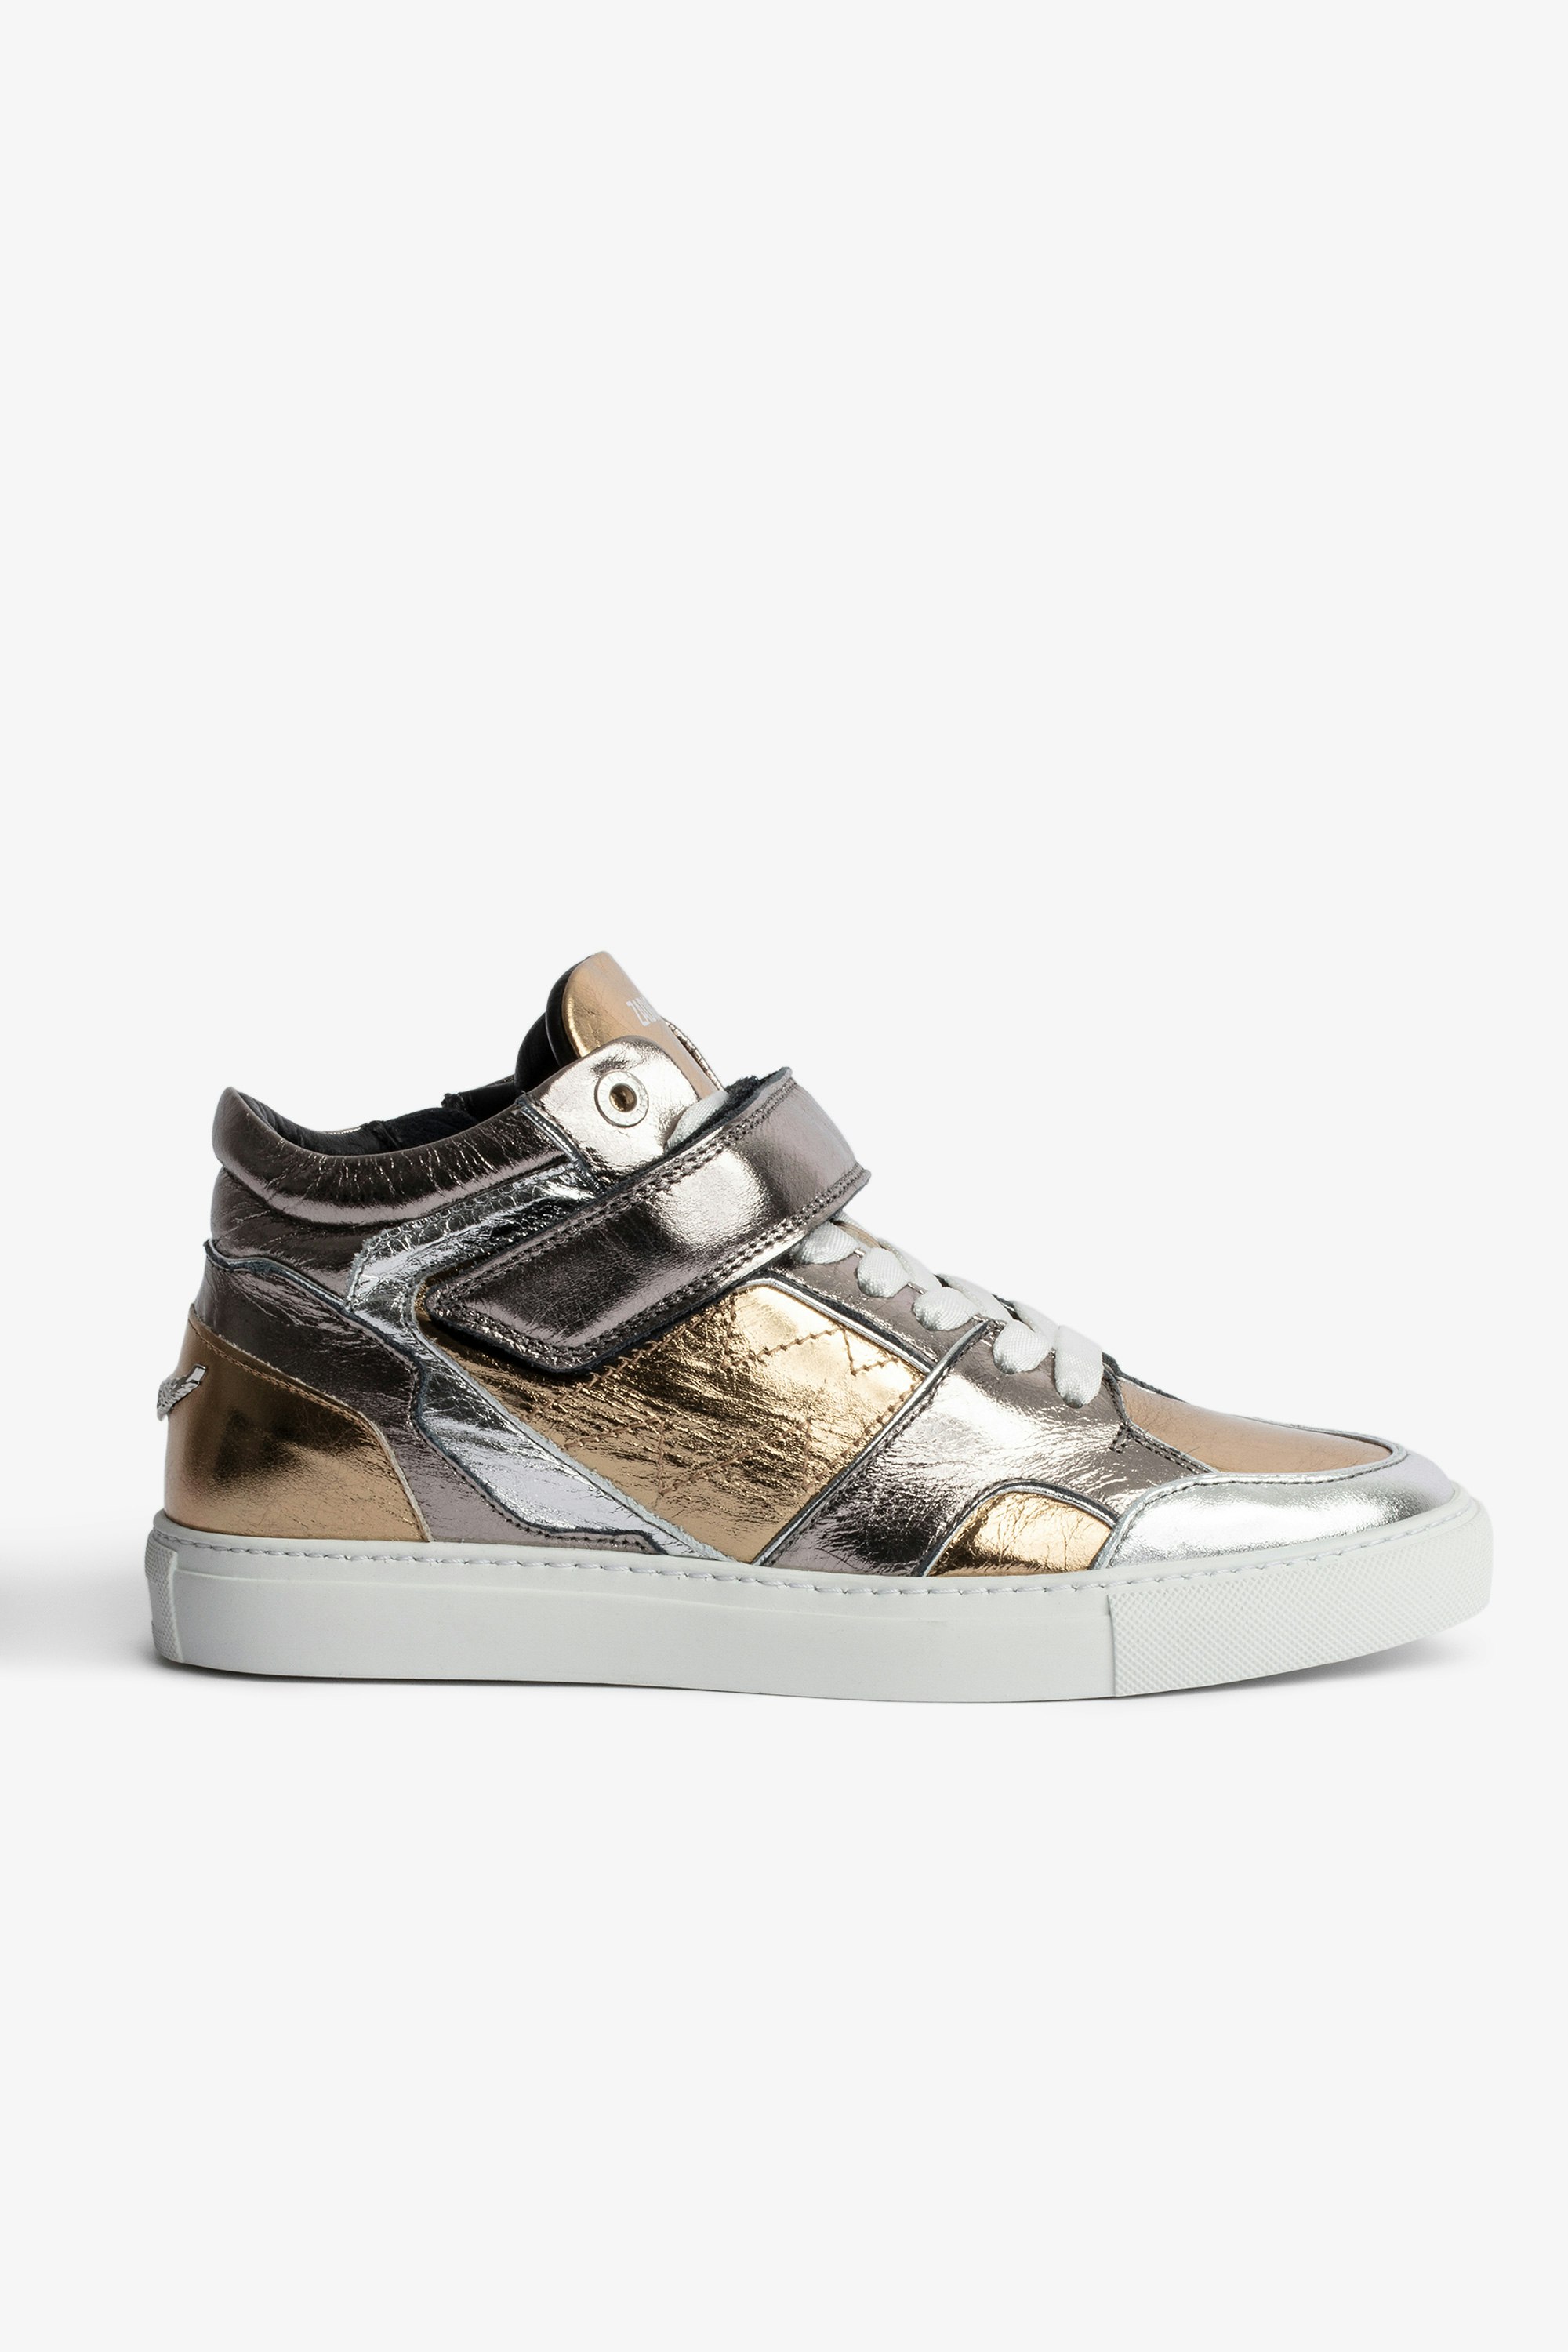 ZV1747 Mid Flash Vintage Metal Mix Sneakers - Women’s mid-top sneakers in silver and gold metallic leather